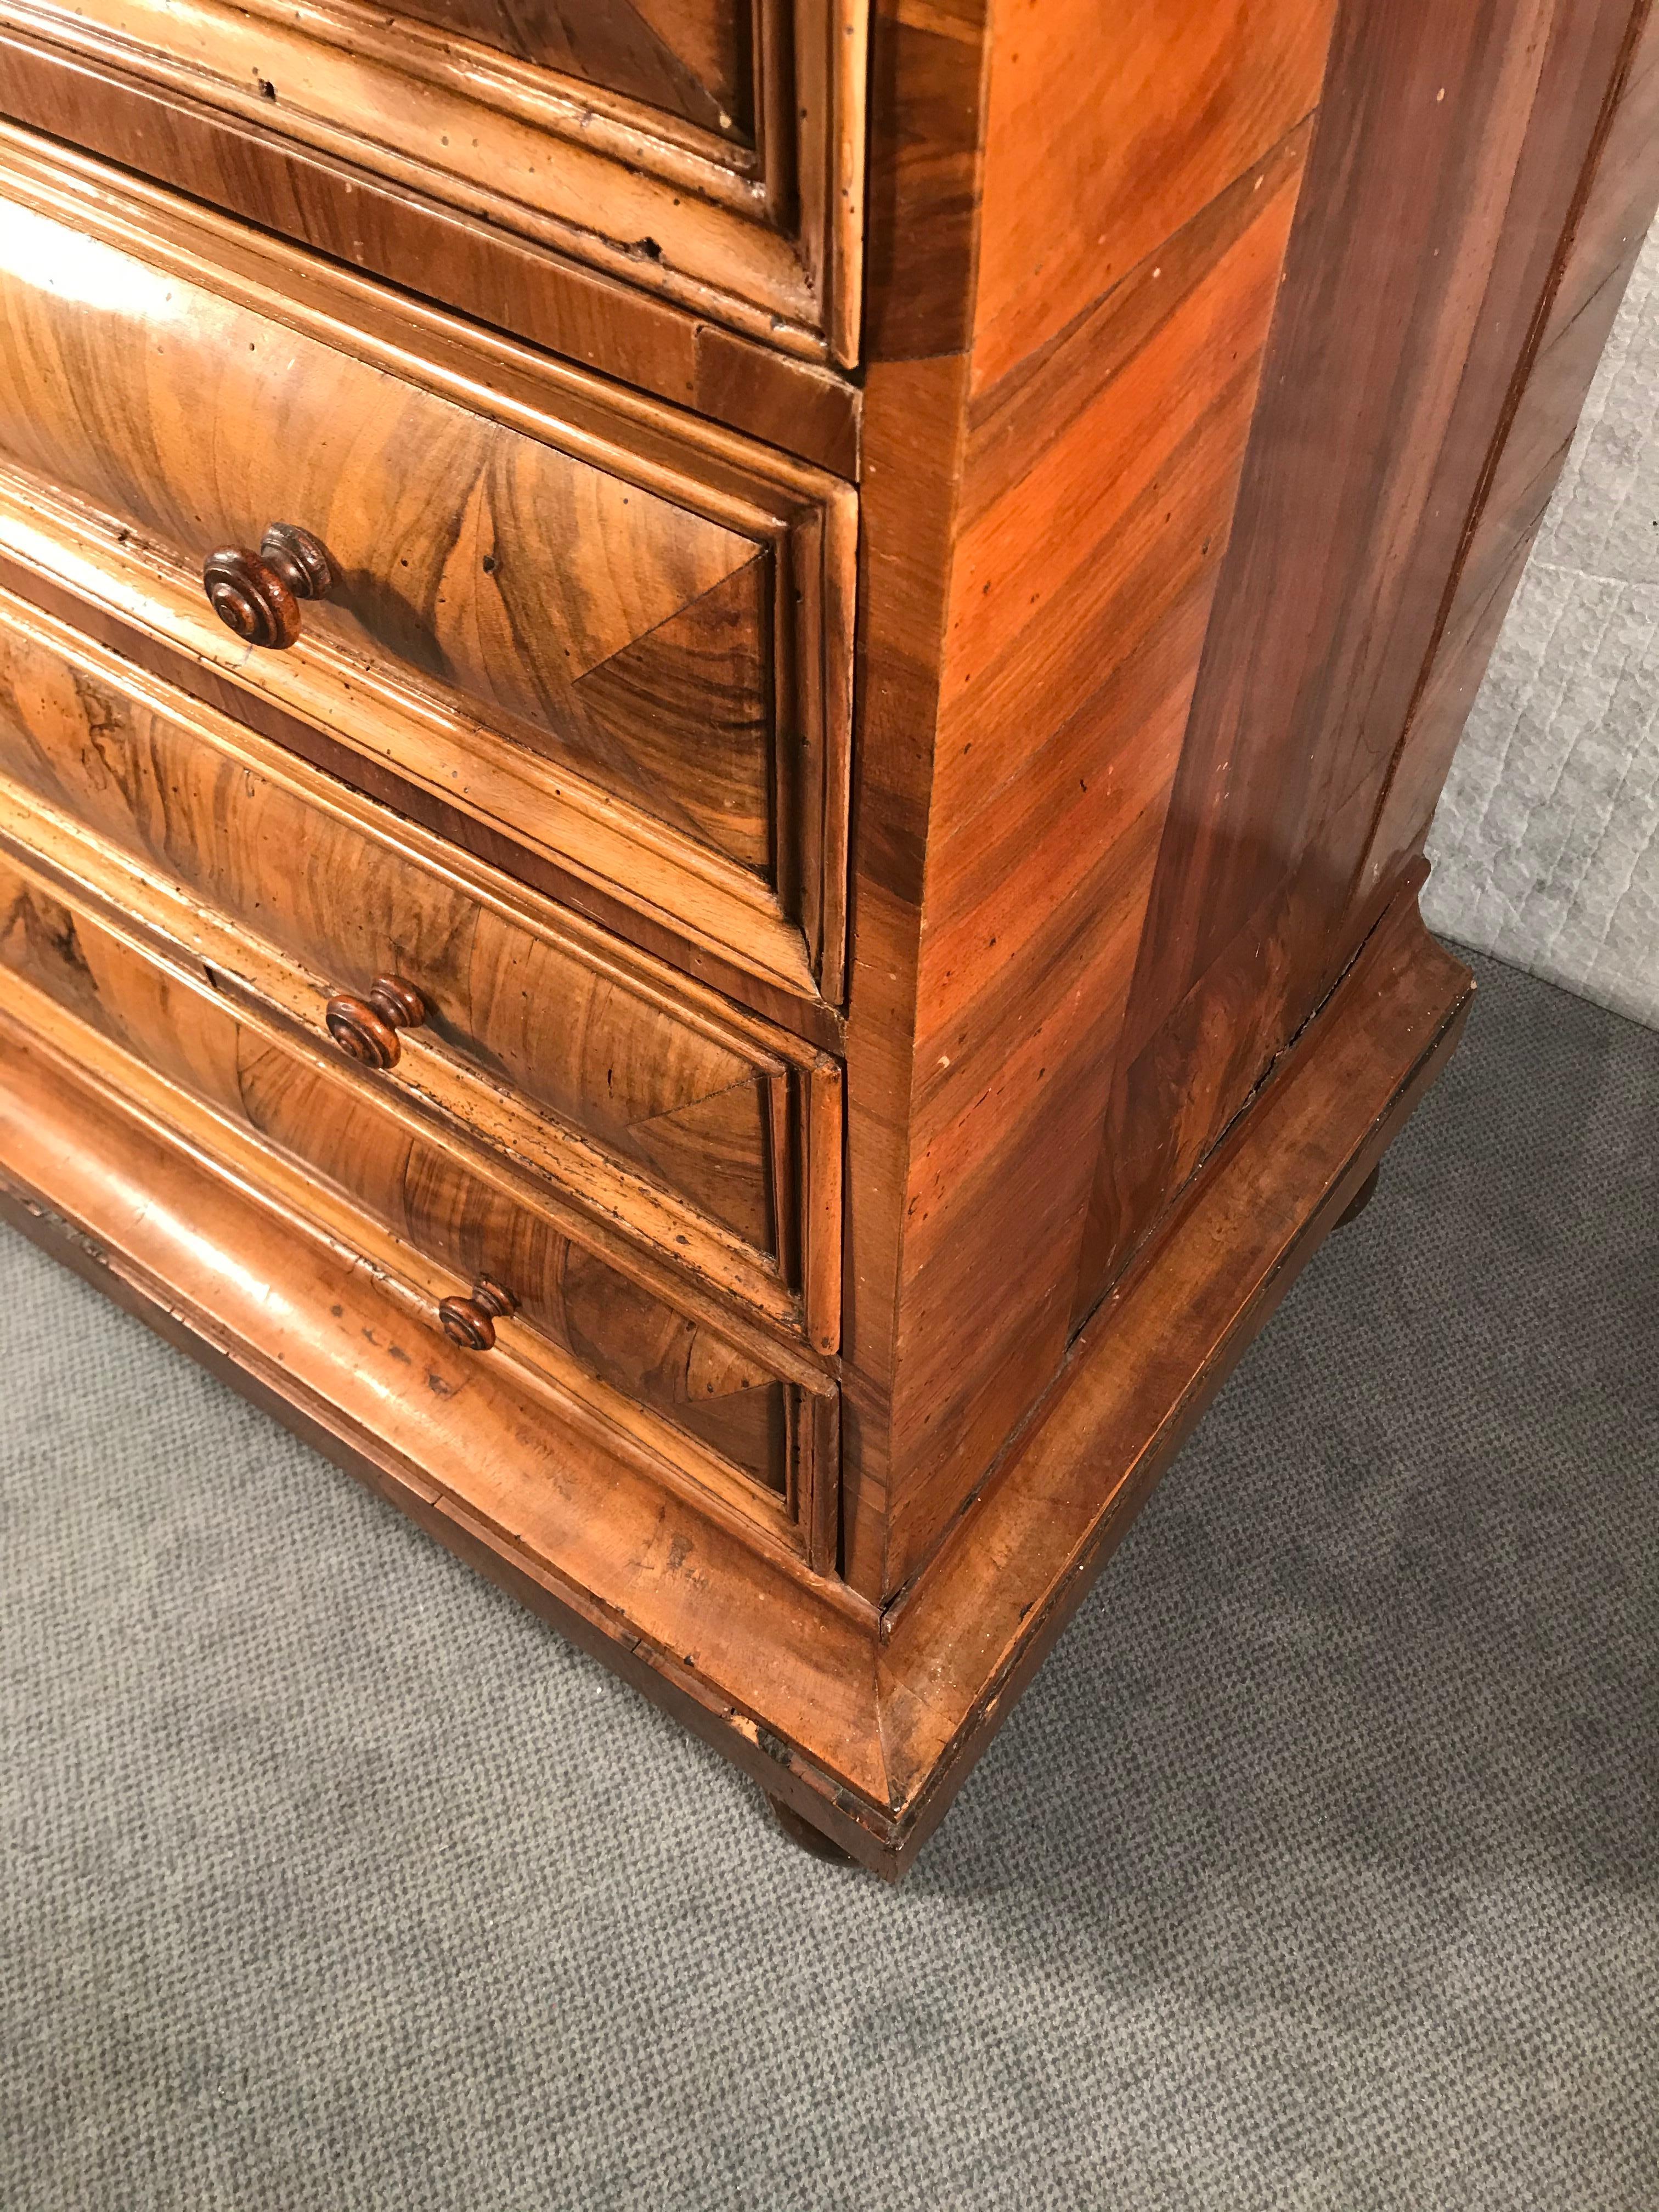 Windellade cabinet, Zurich region 1770-1780 walnut veneer. In very good condition. The cabinet will be shipped from Europe. Shipping costs to Boston are included.